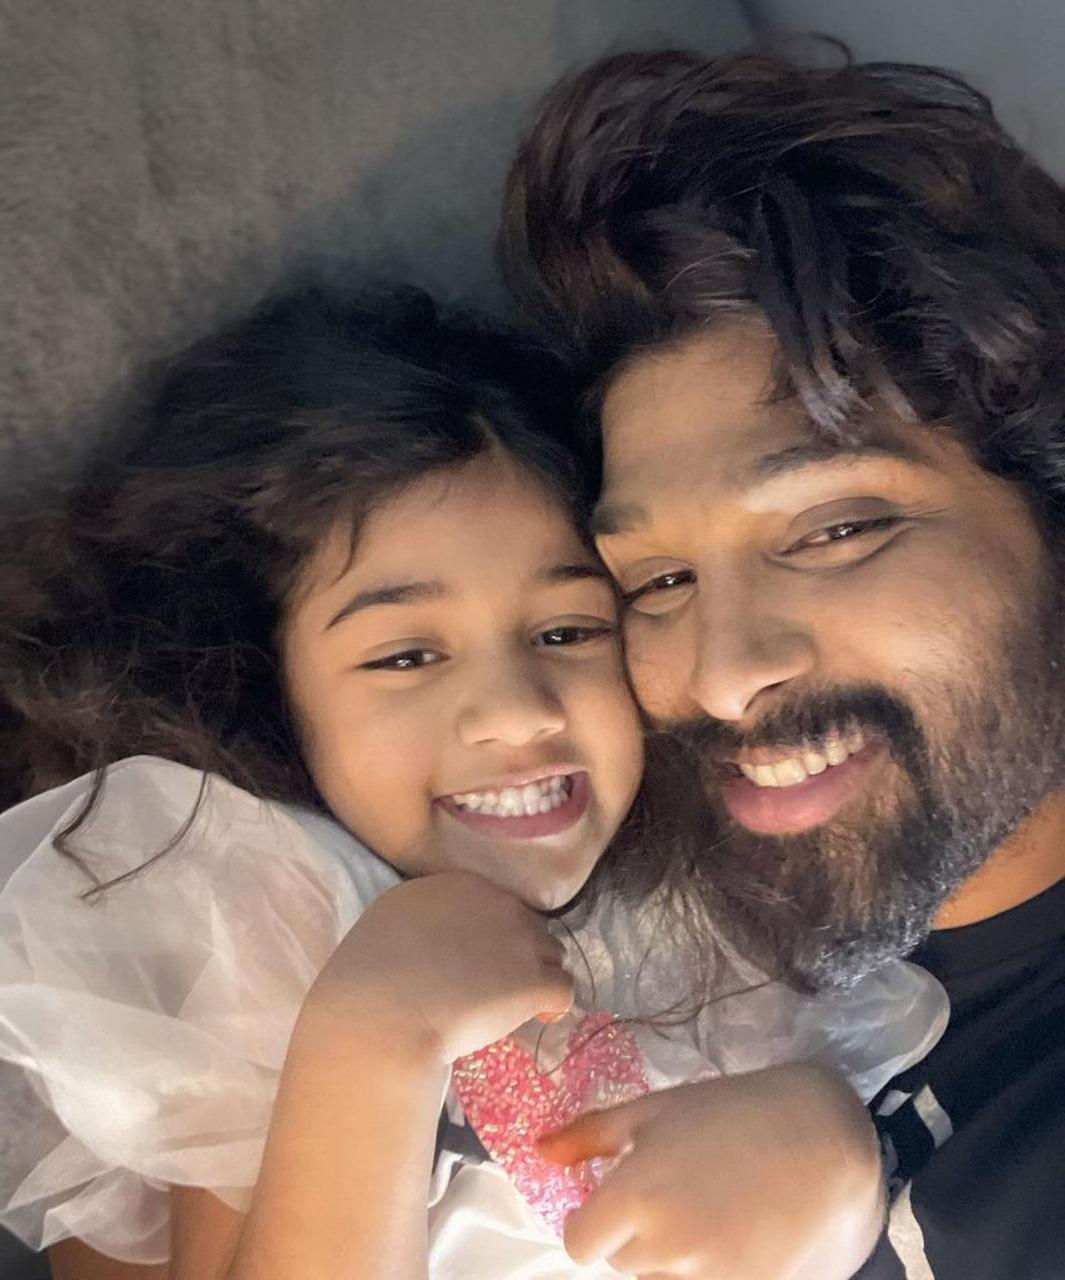 Allu Arha
Allu Arha is Allu Arjun and Sneha Reddy's daughter. She made her acting debut with Samantha Ruth Prabhu's Shaakuntalam. The little one played the role of King Bharat